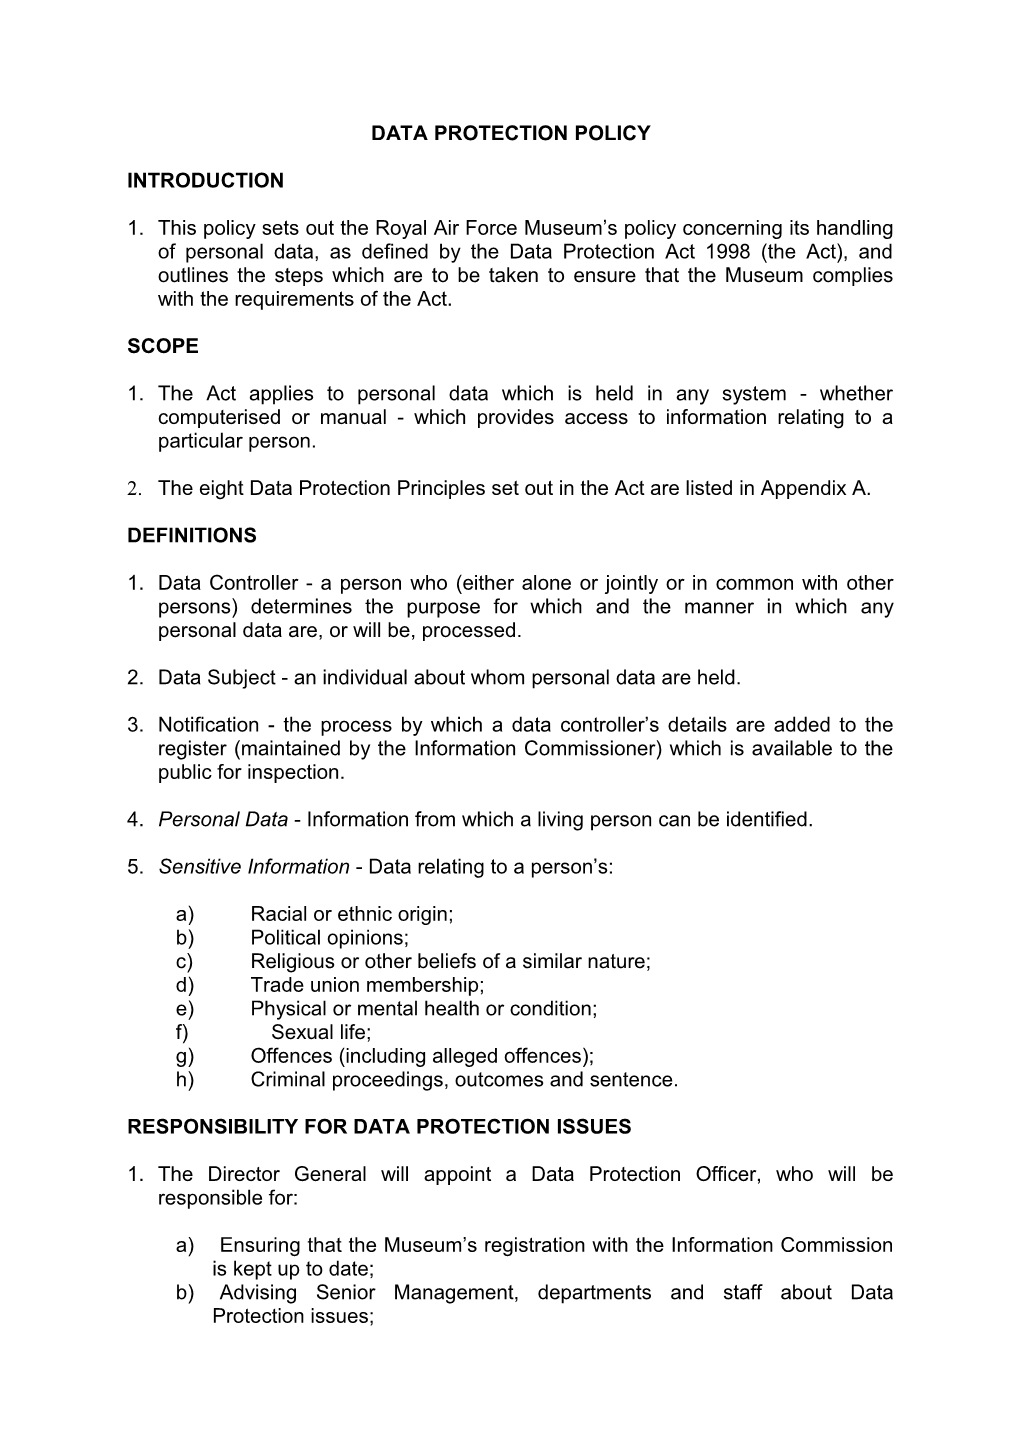 Data Protection Policy s1